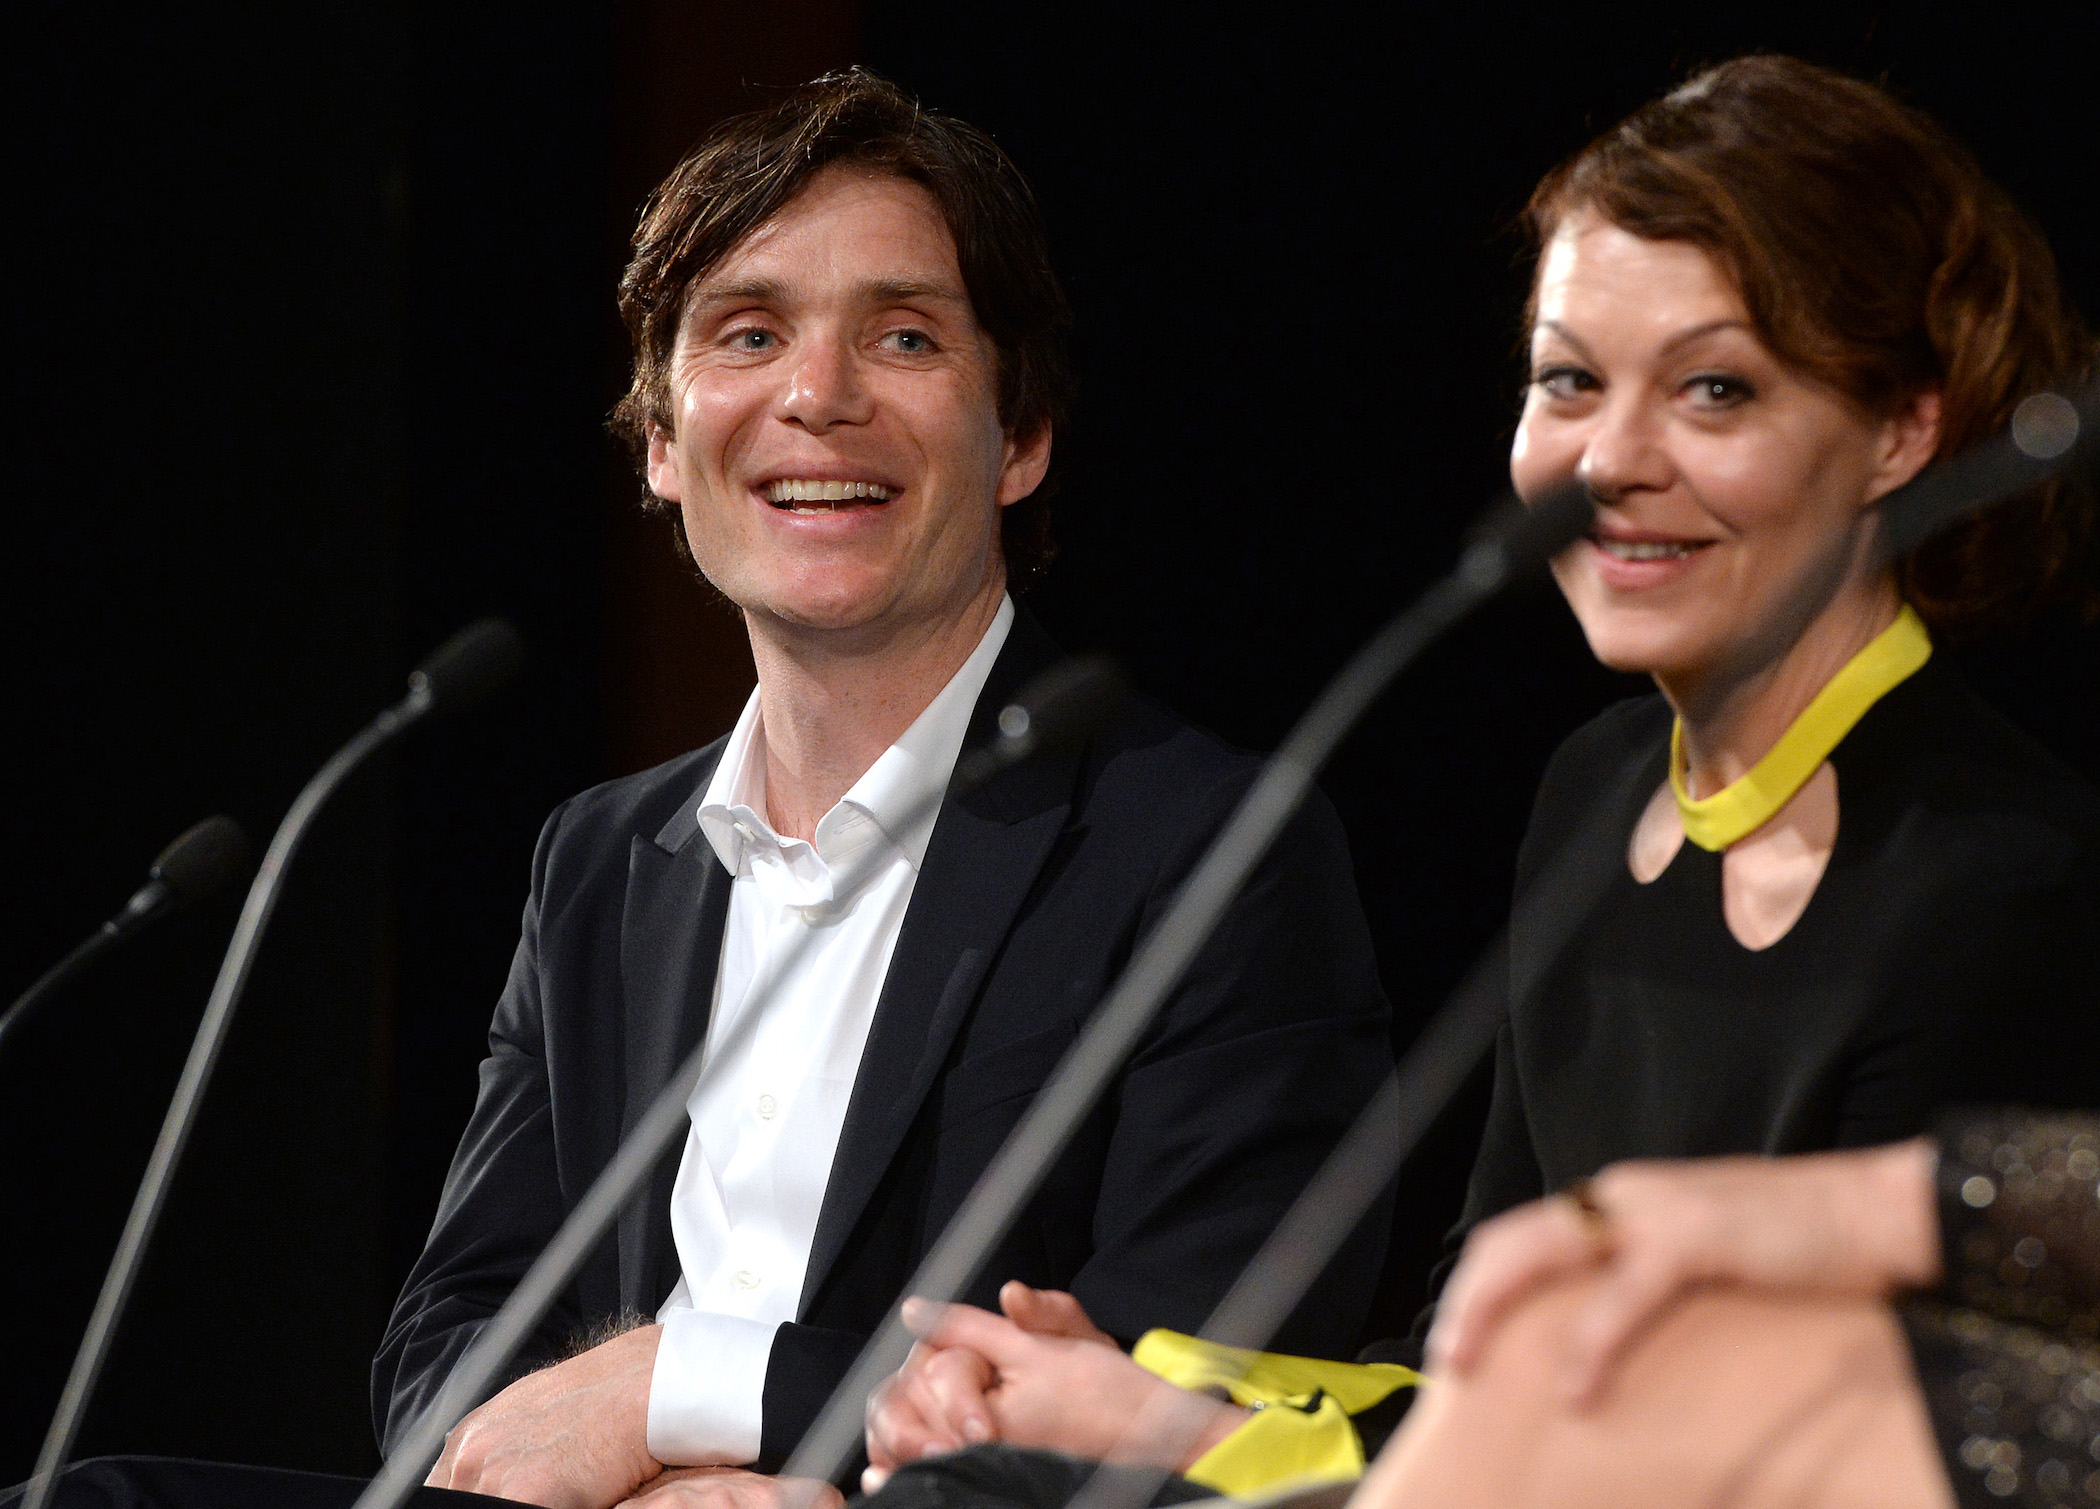 Cillian Murphy and Helen McCrory during a Q&A